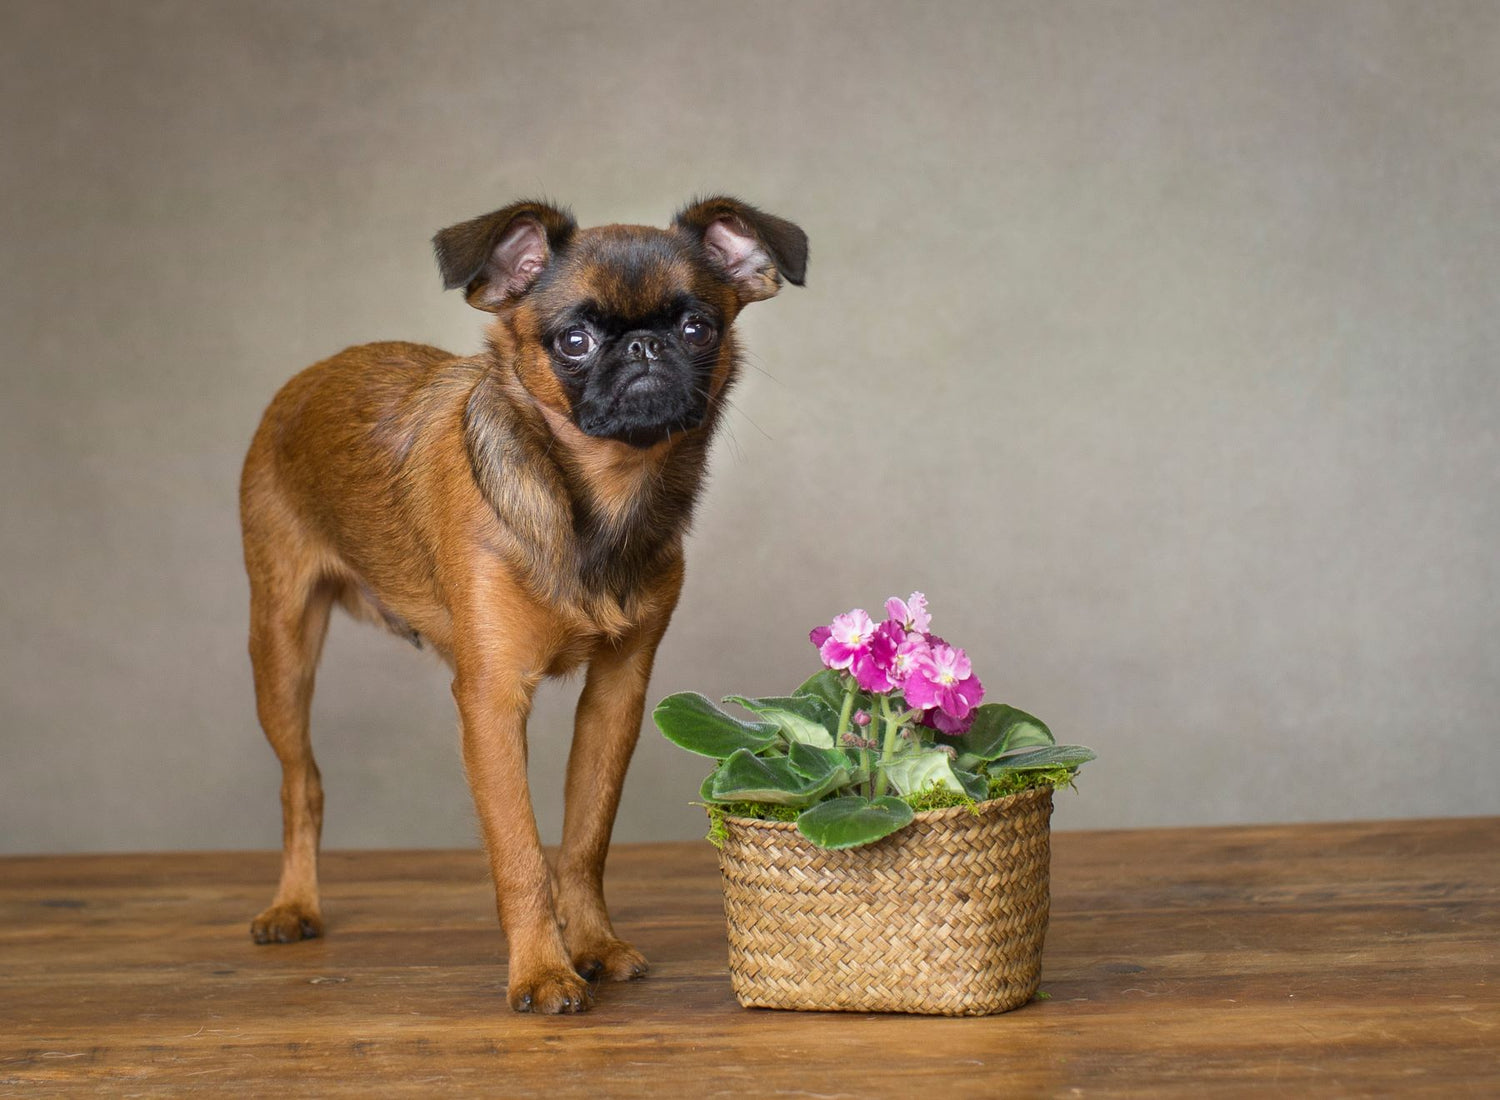 The image features a small brown and black dog resembling a pug or chihuahua standing next to a non-toxic houseplant, the African violet, in a wicker basket. The scene takes place on a pine floor with a gray background.